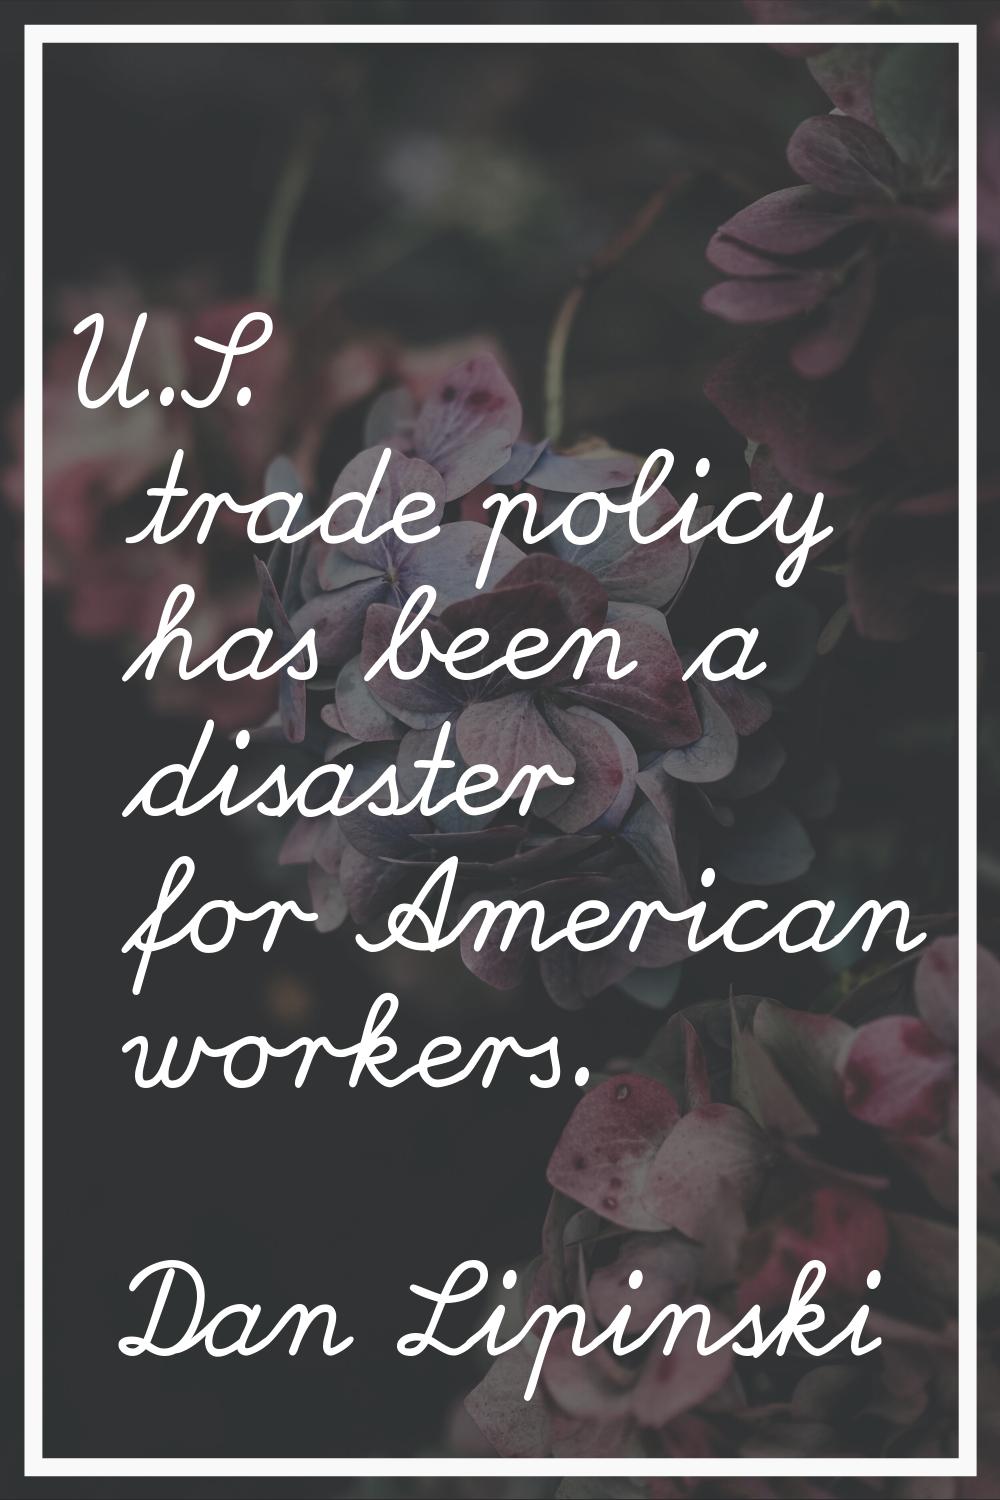 U.S. trade policy has been a disaster for American workers.